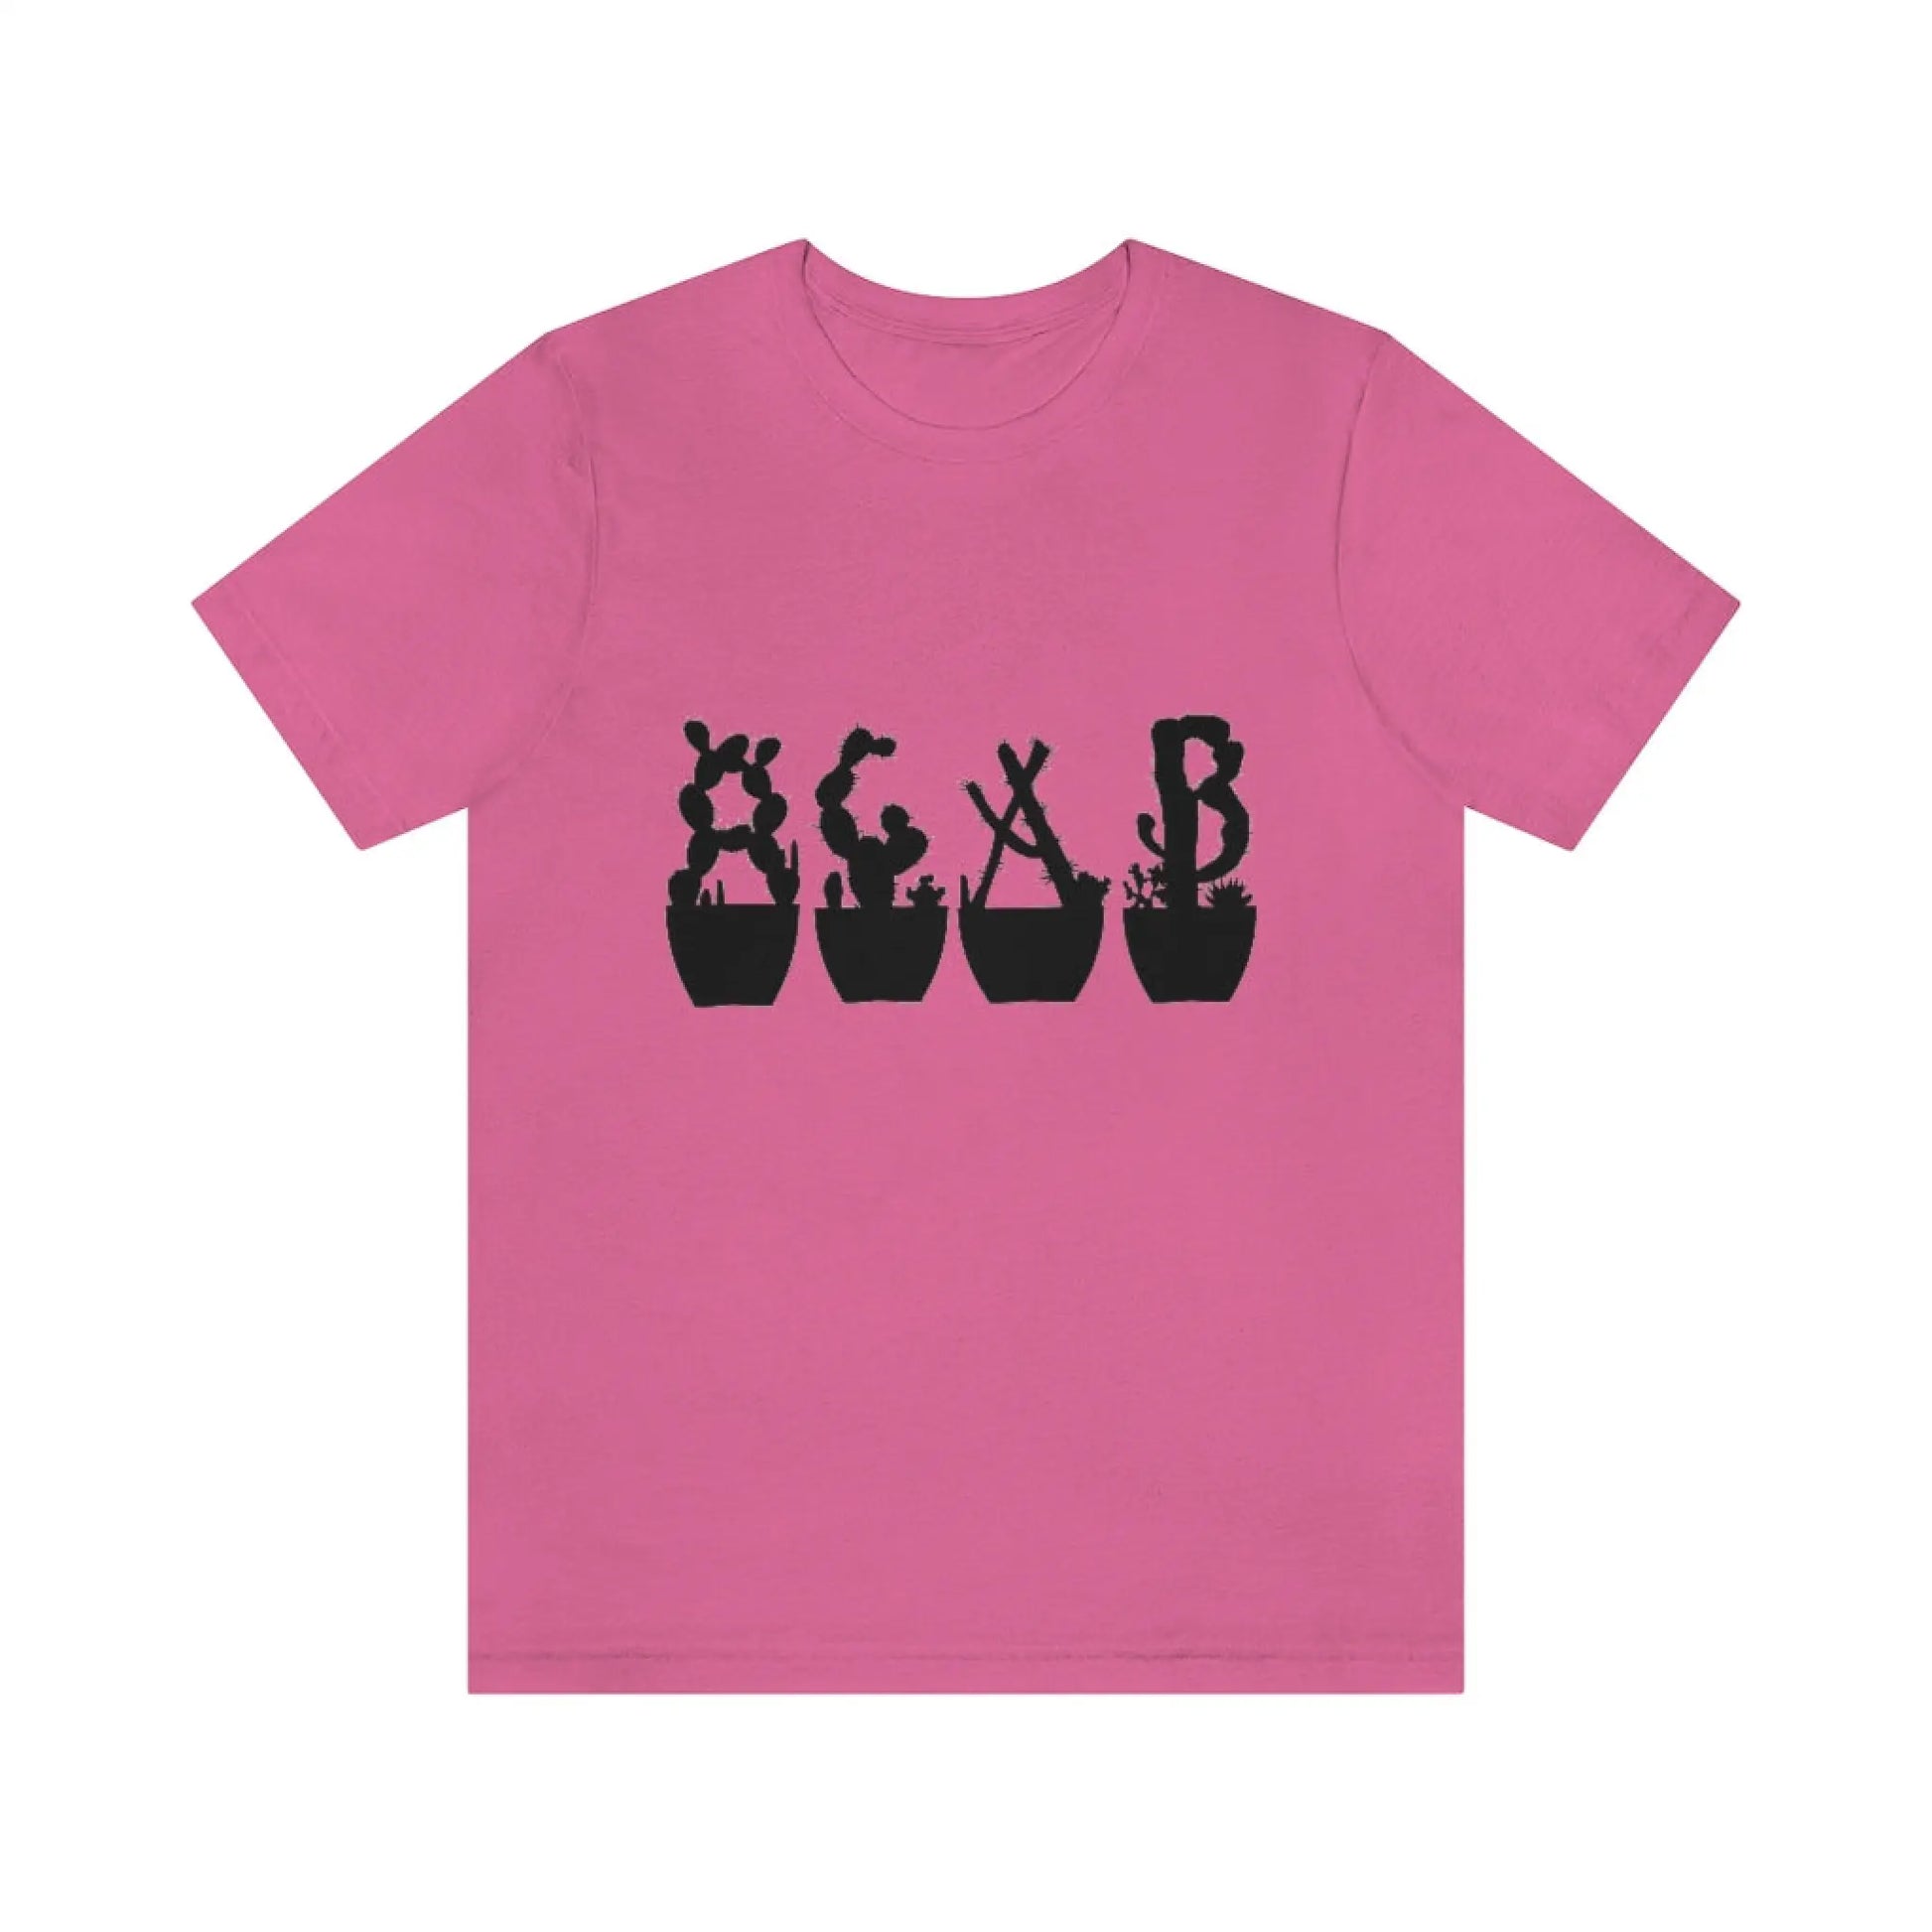 Shirts - Just Beautiful Cactuses - Charity Pink / S -